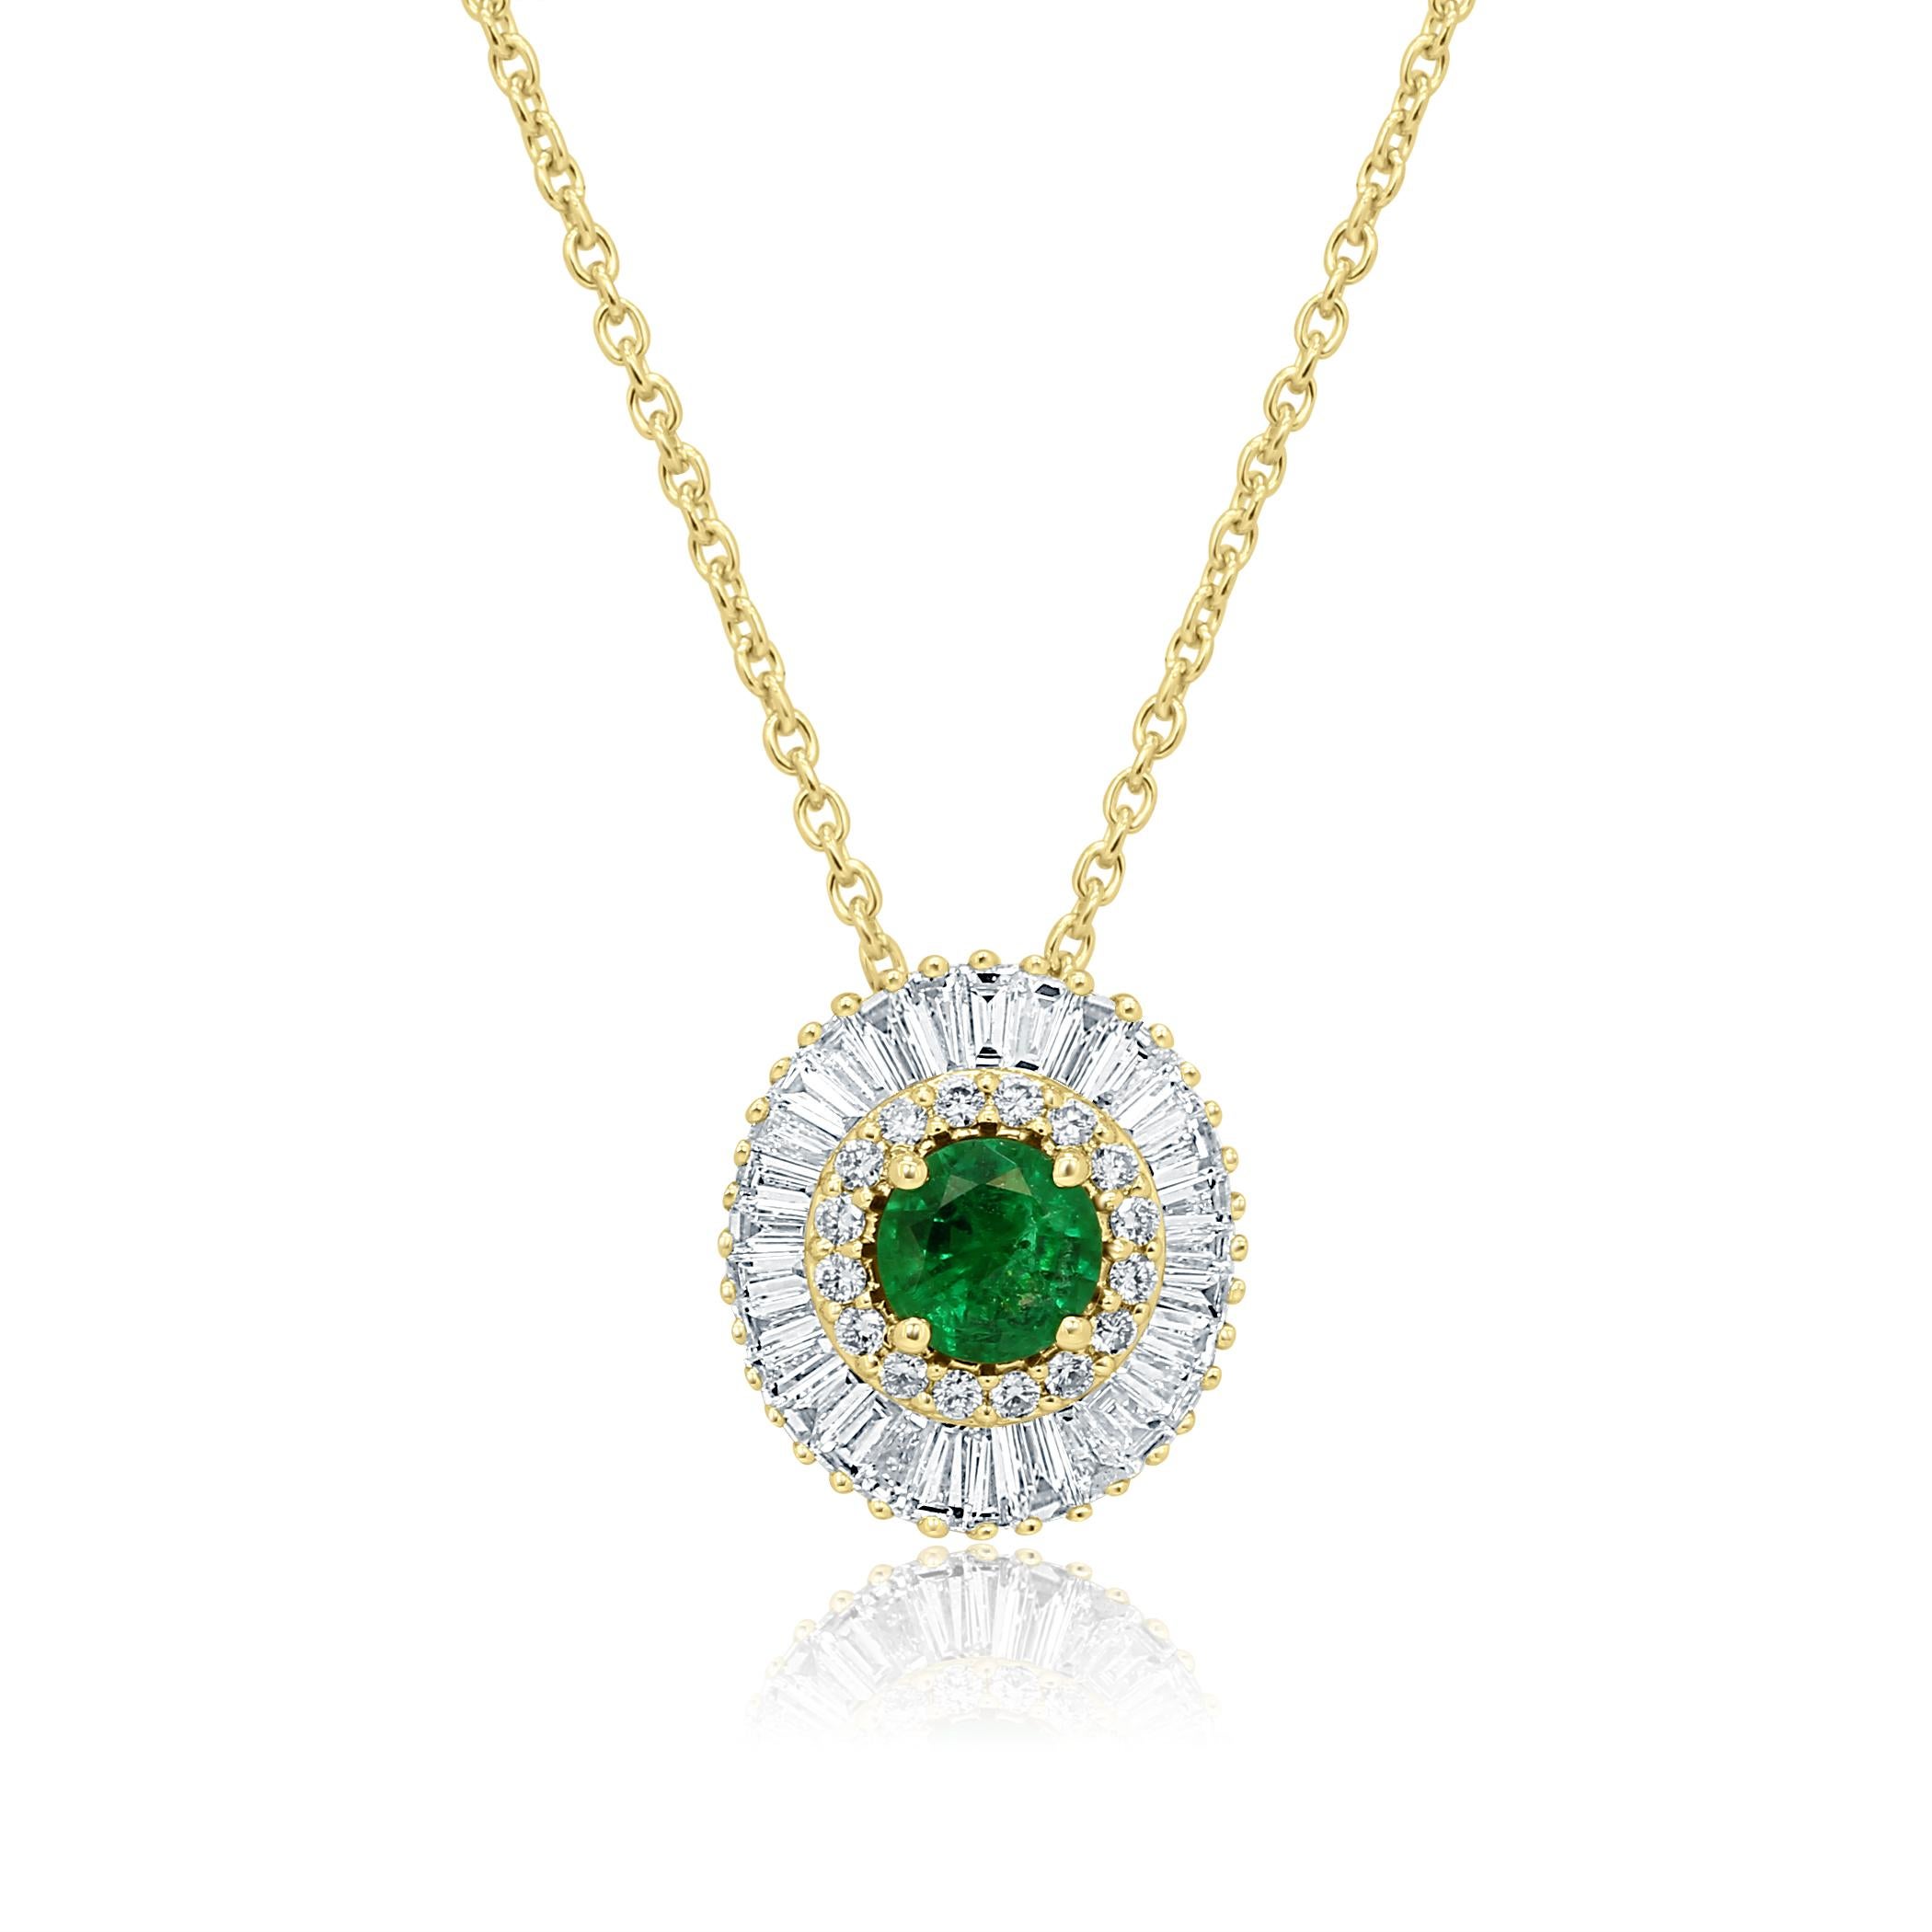 Emerald round 0.44 Carat Encircled in Double Halo of Colorless  G-H Round Brilliant VS SI clarity 0.11 Carat and Colorless Diamond Baguettes VS clarity 0.46 Carat in 14K Yellow Gold  Art Deco Ballerina Fashion Pendant Chain Necklace.

Total Stone